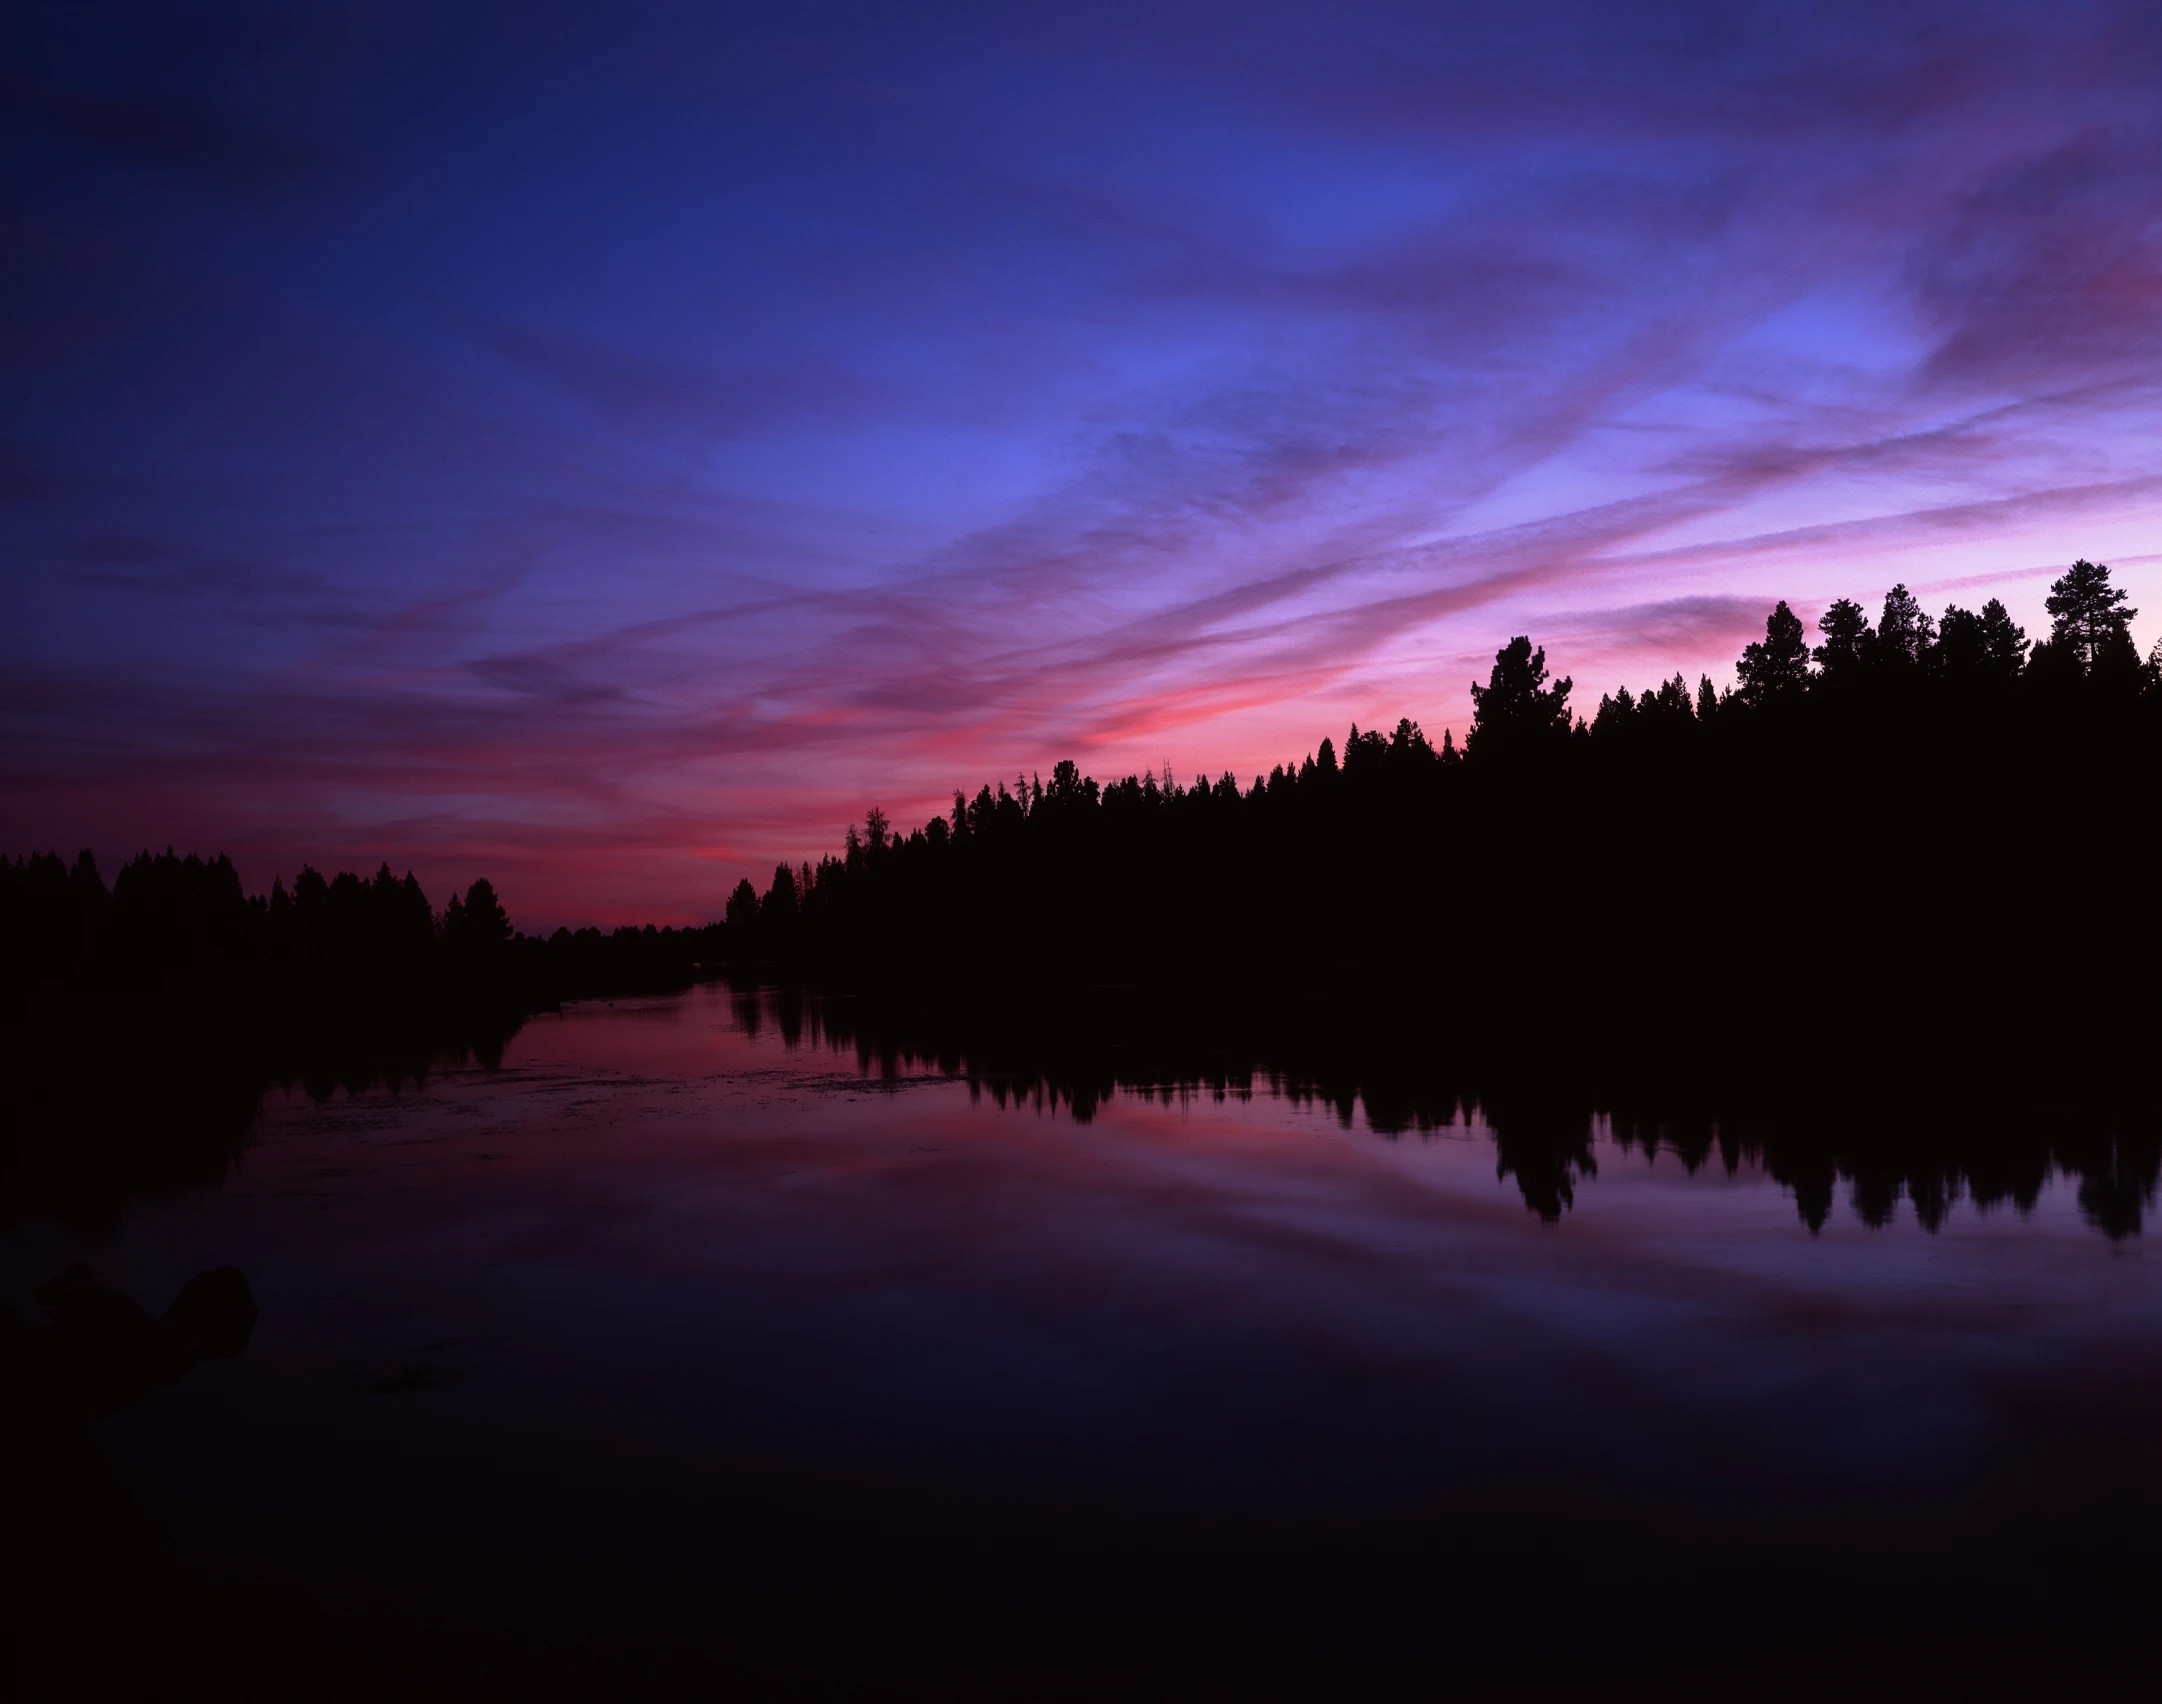 this is a purple sky at sunset and it reflects the reflection of a forested area